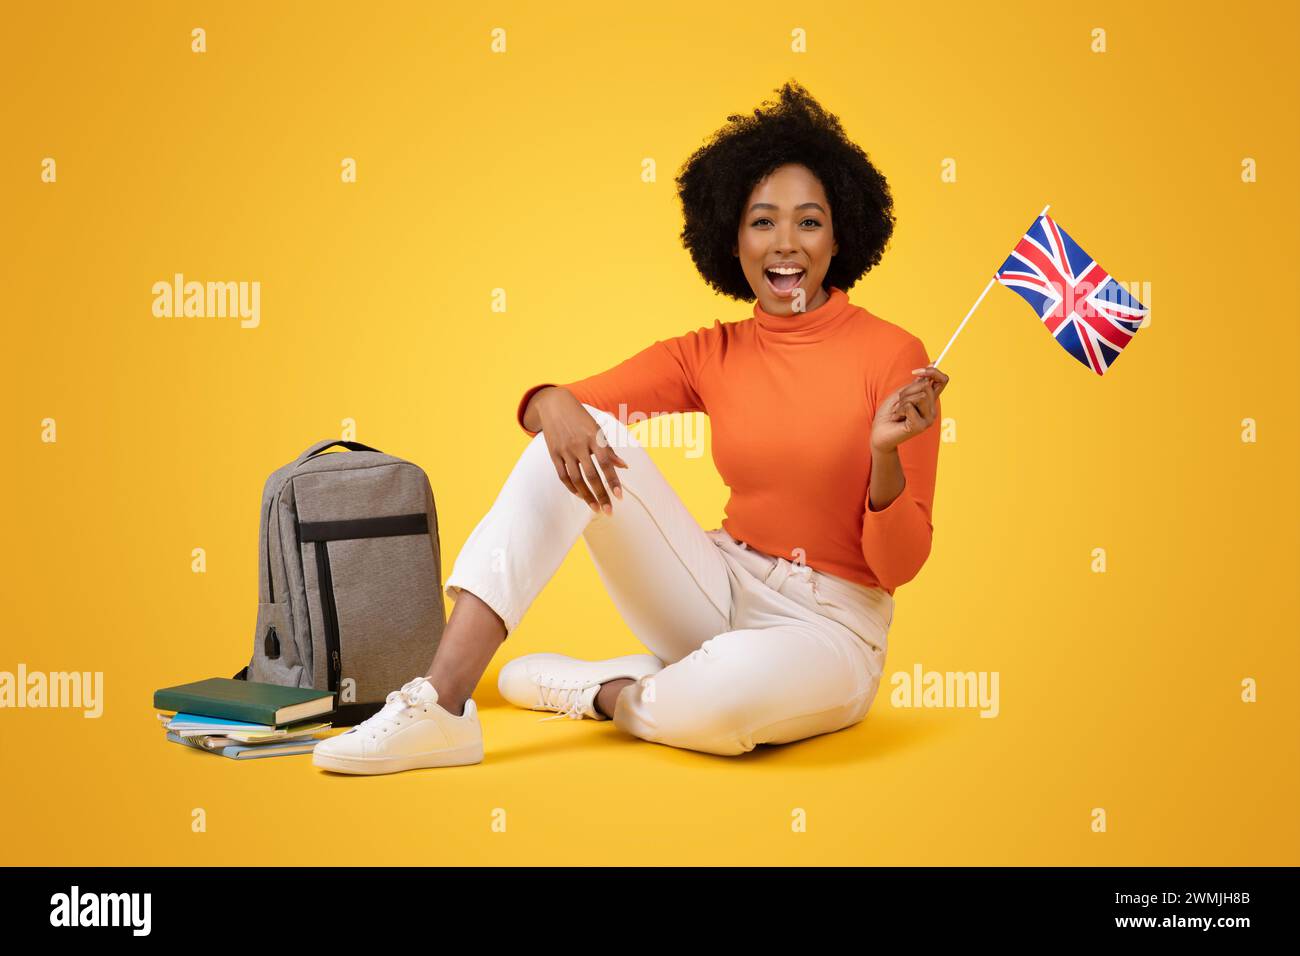 Excited African American woman sitting on the ground, holding a British flag with a joyful expression Stock Photo